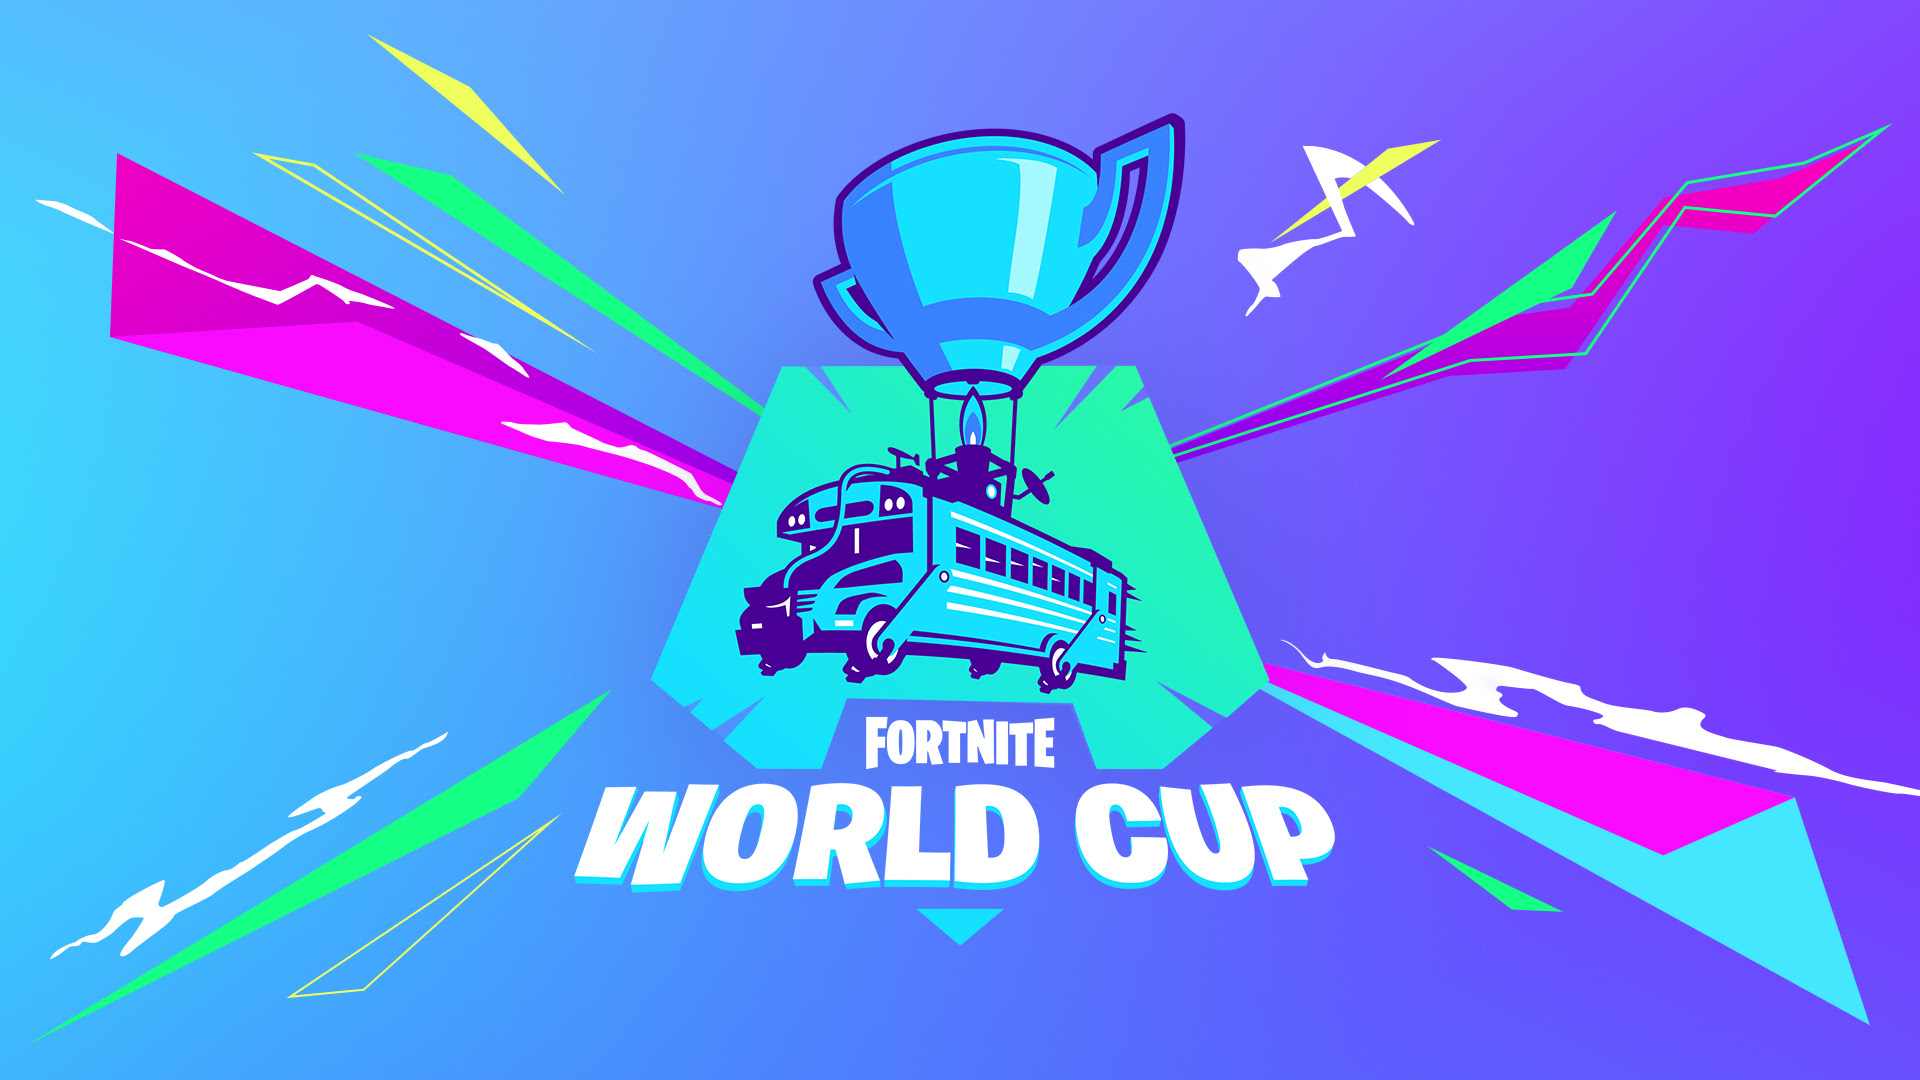 Fortnite World Cup Open Qualifiers Schedule And How To Qualify - how to qualify for the fortnite world cup through open qualifiers